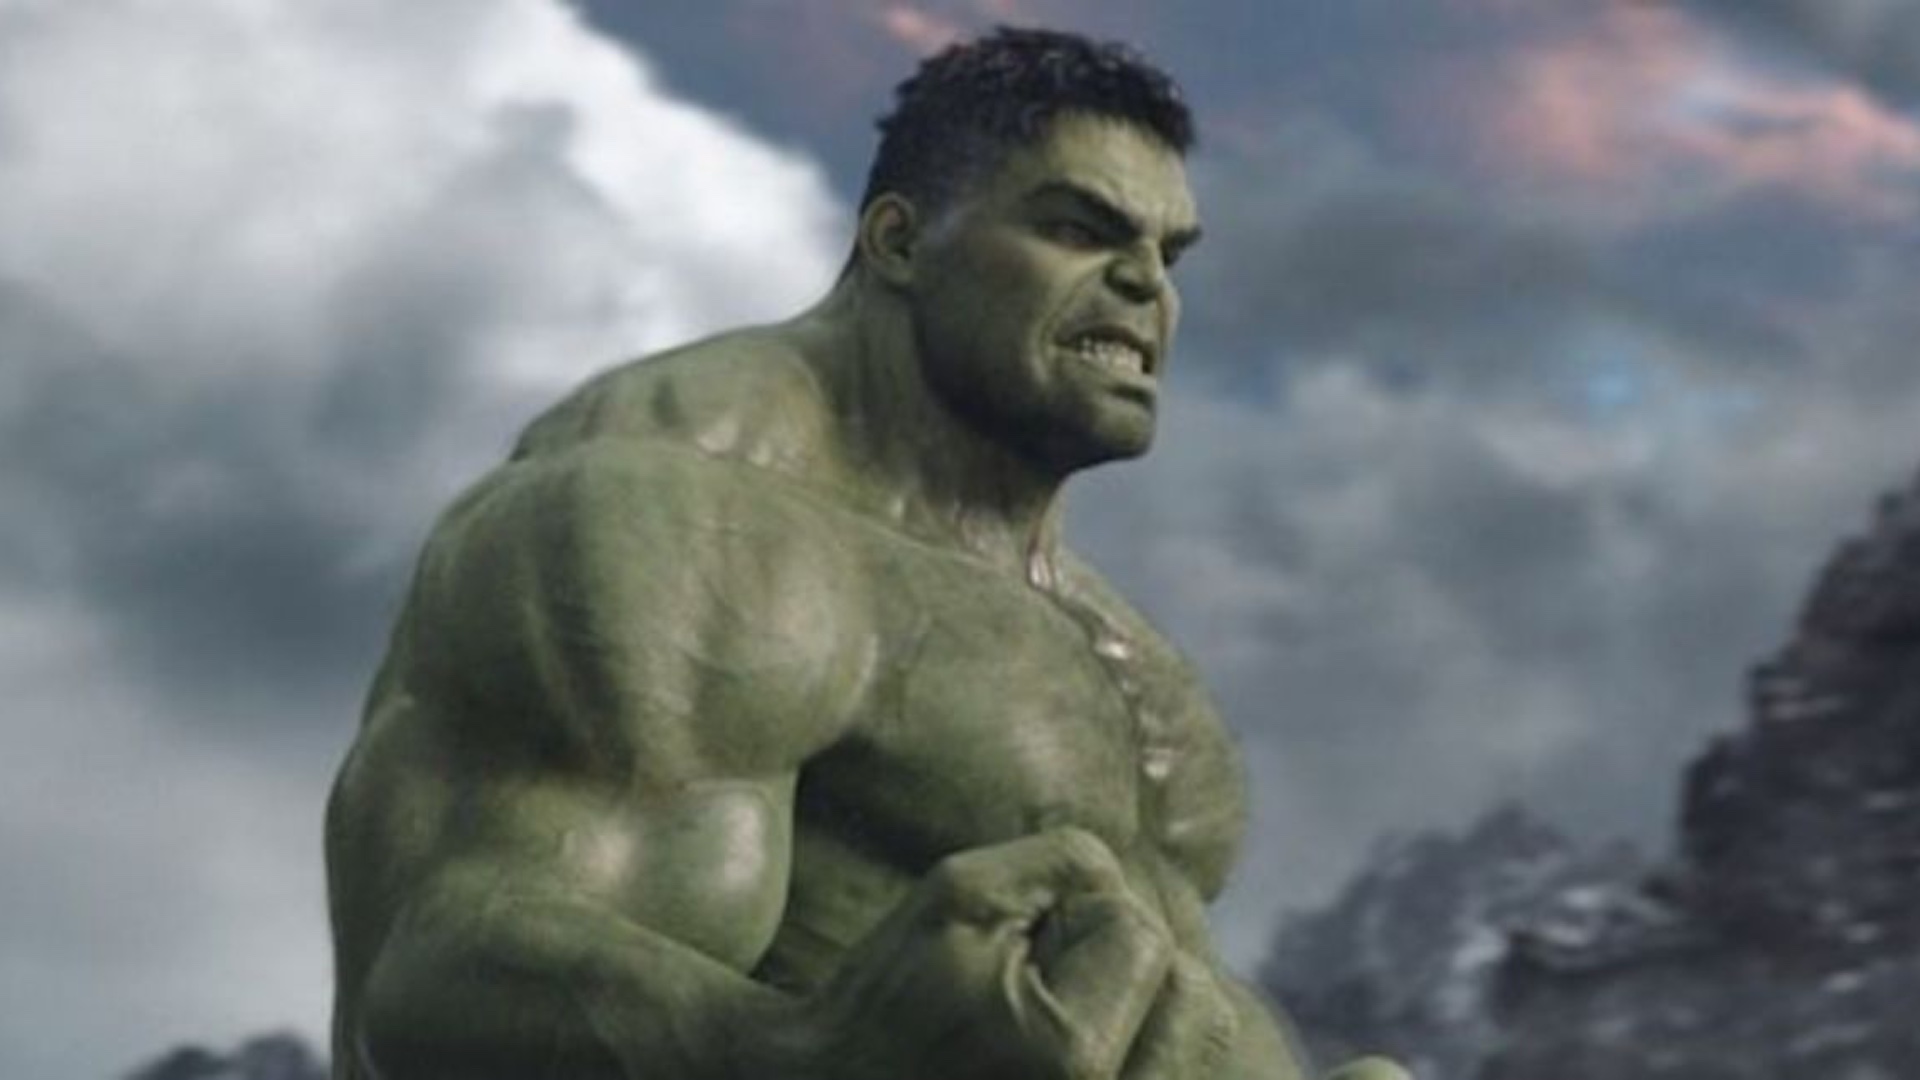 World War Hulk was rumored to be in the making